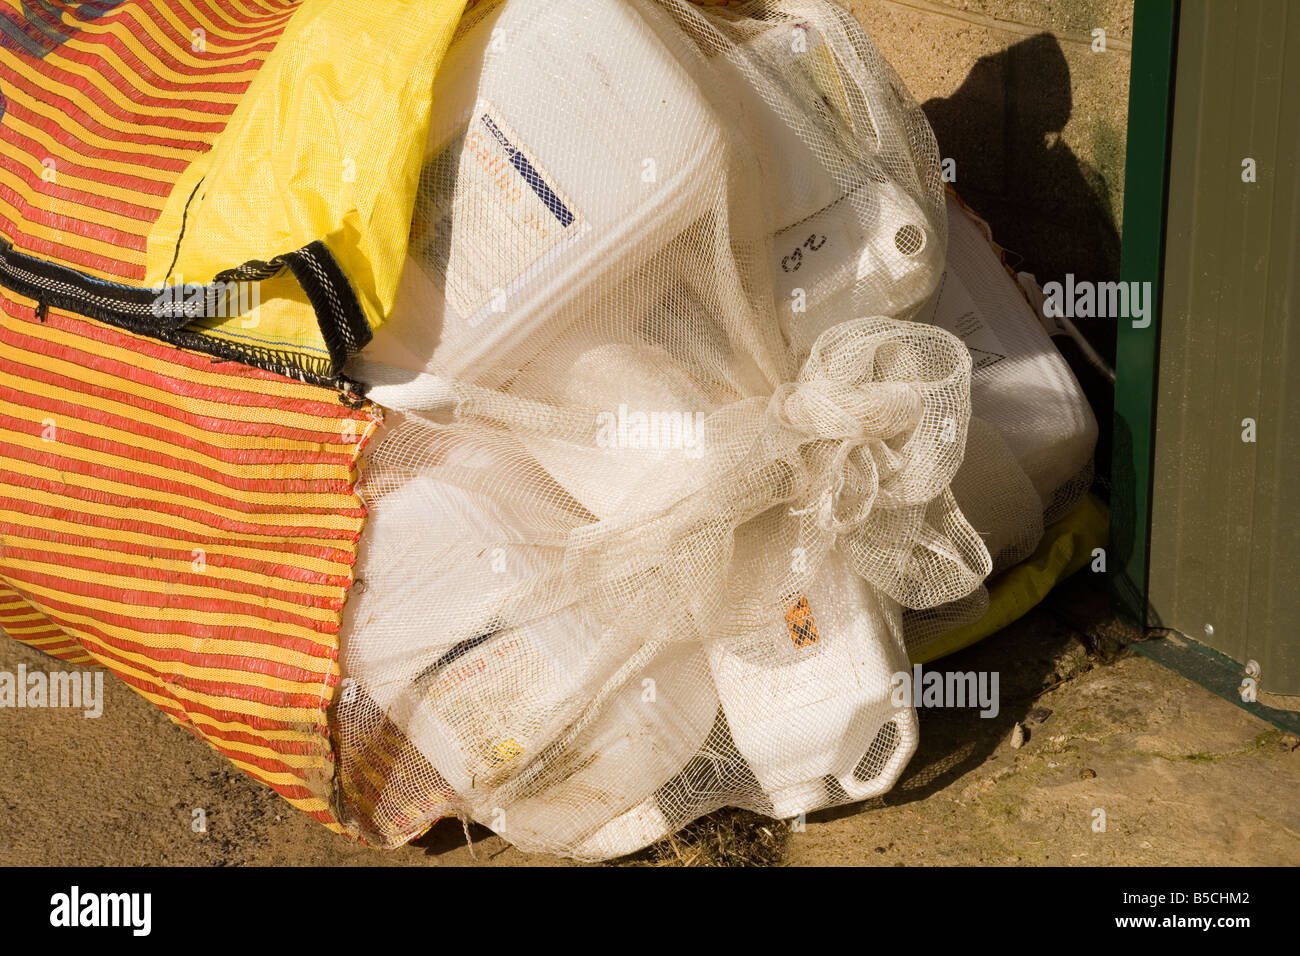 Waste Spray containers bundled into a net ready for collection Stock Photo